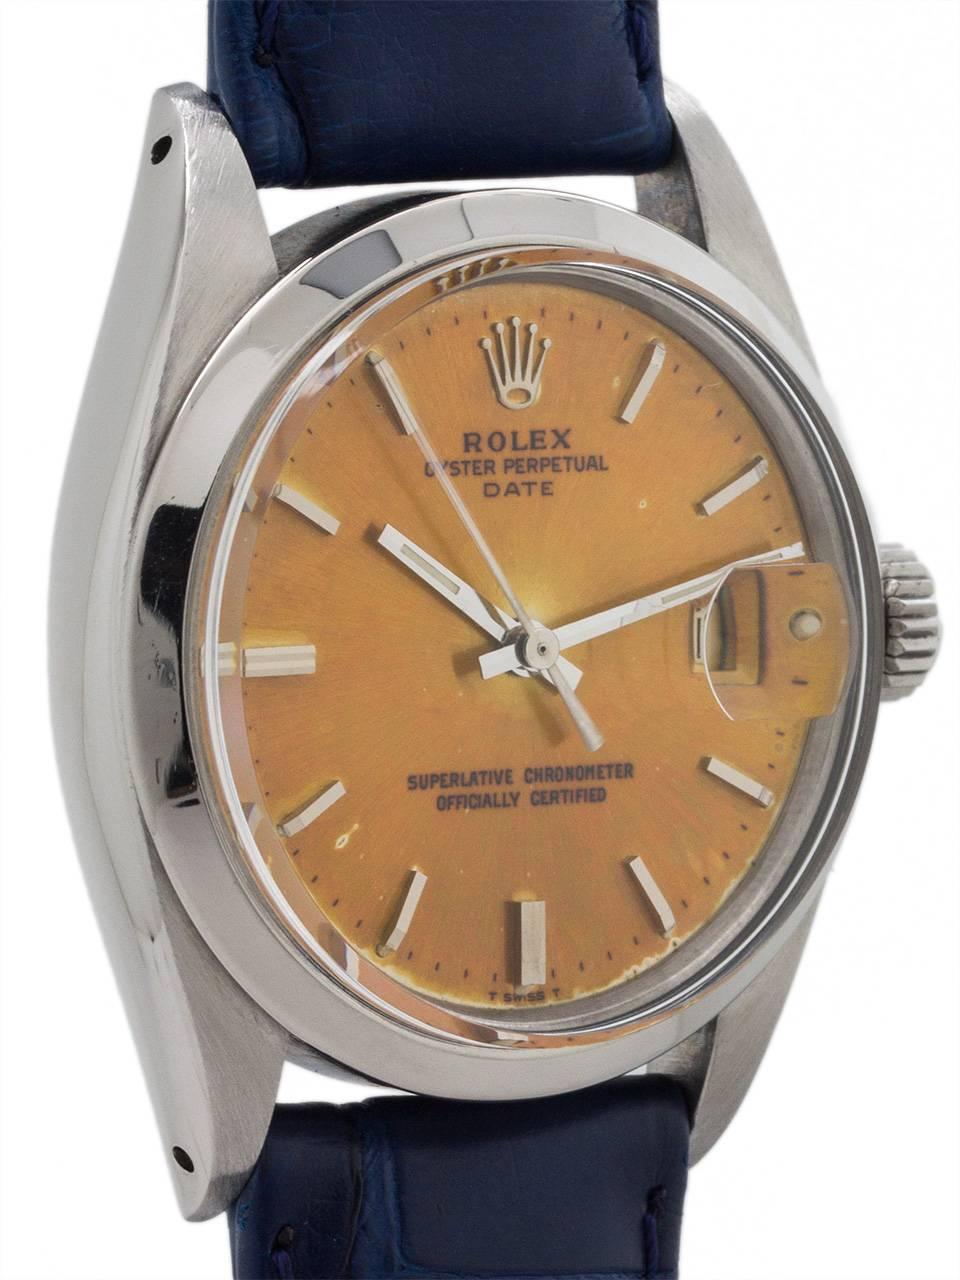 Modern Rolex Stainless Steel Oyster Perpetual Date Wristwatch Model 1500, circa 1965